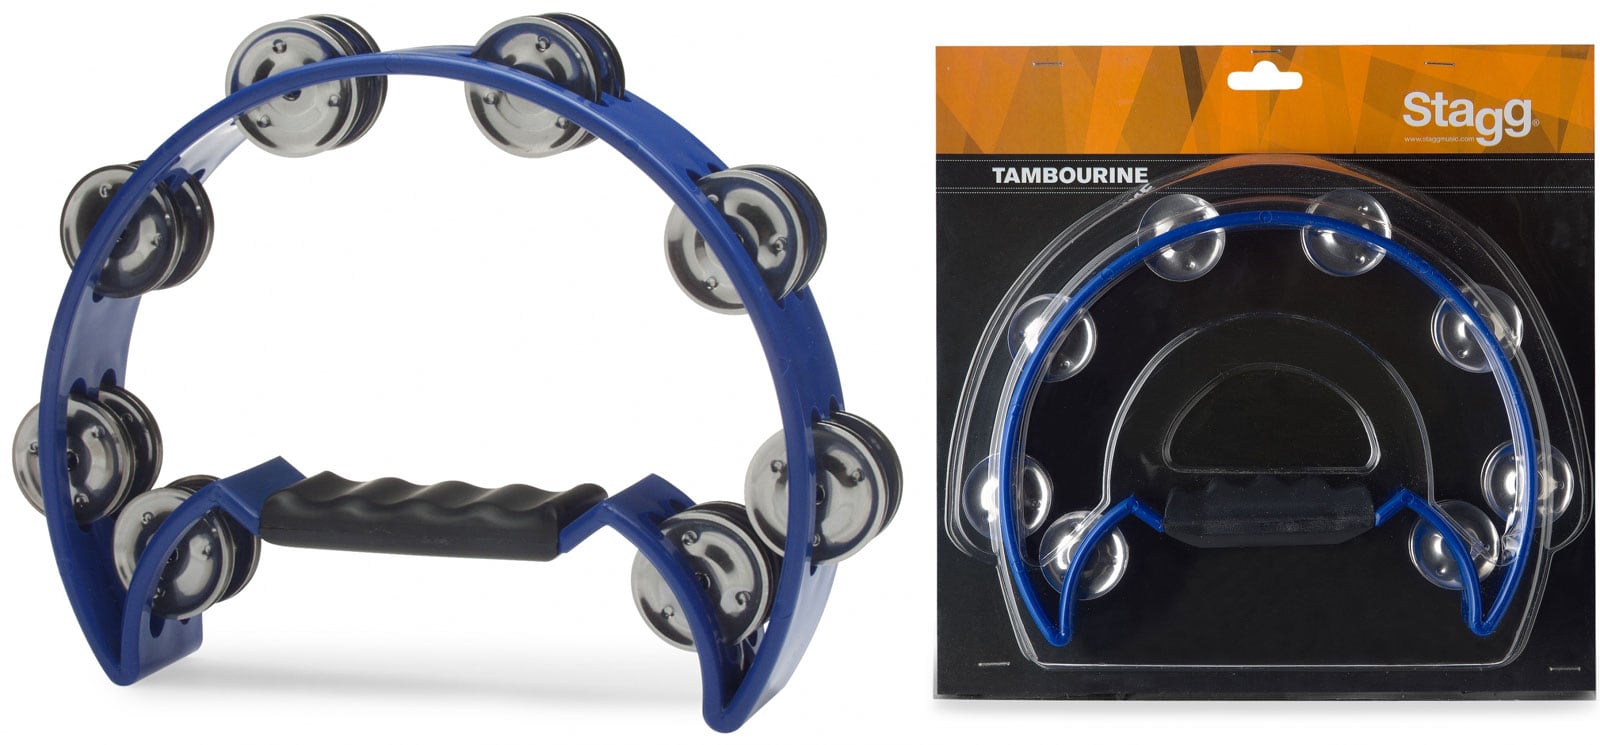 STAGG TAMBOURIN 1/2 LUNE 16 CYMBALETTES BLEU